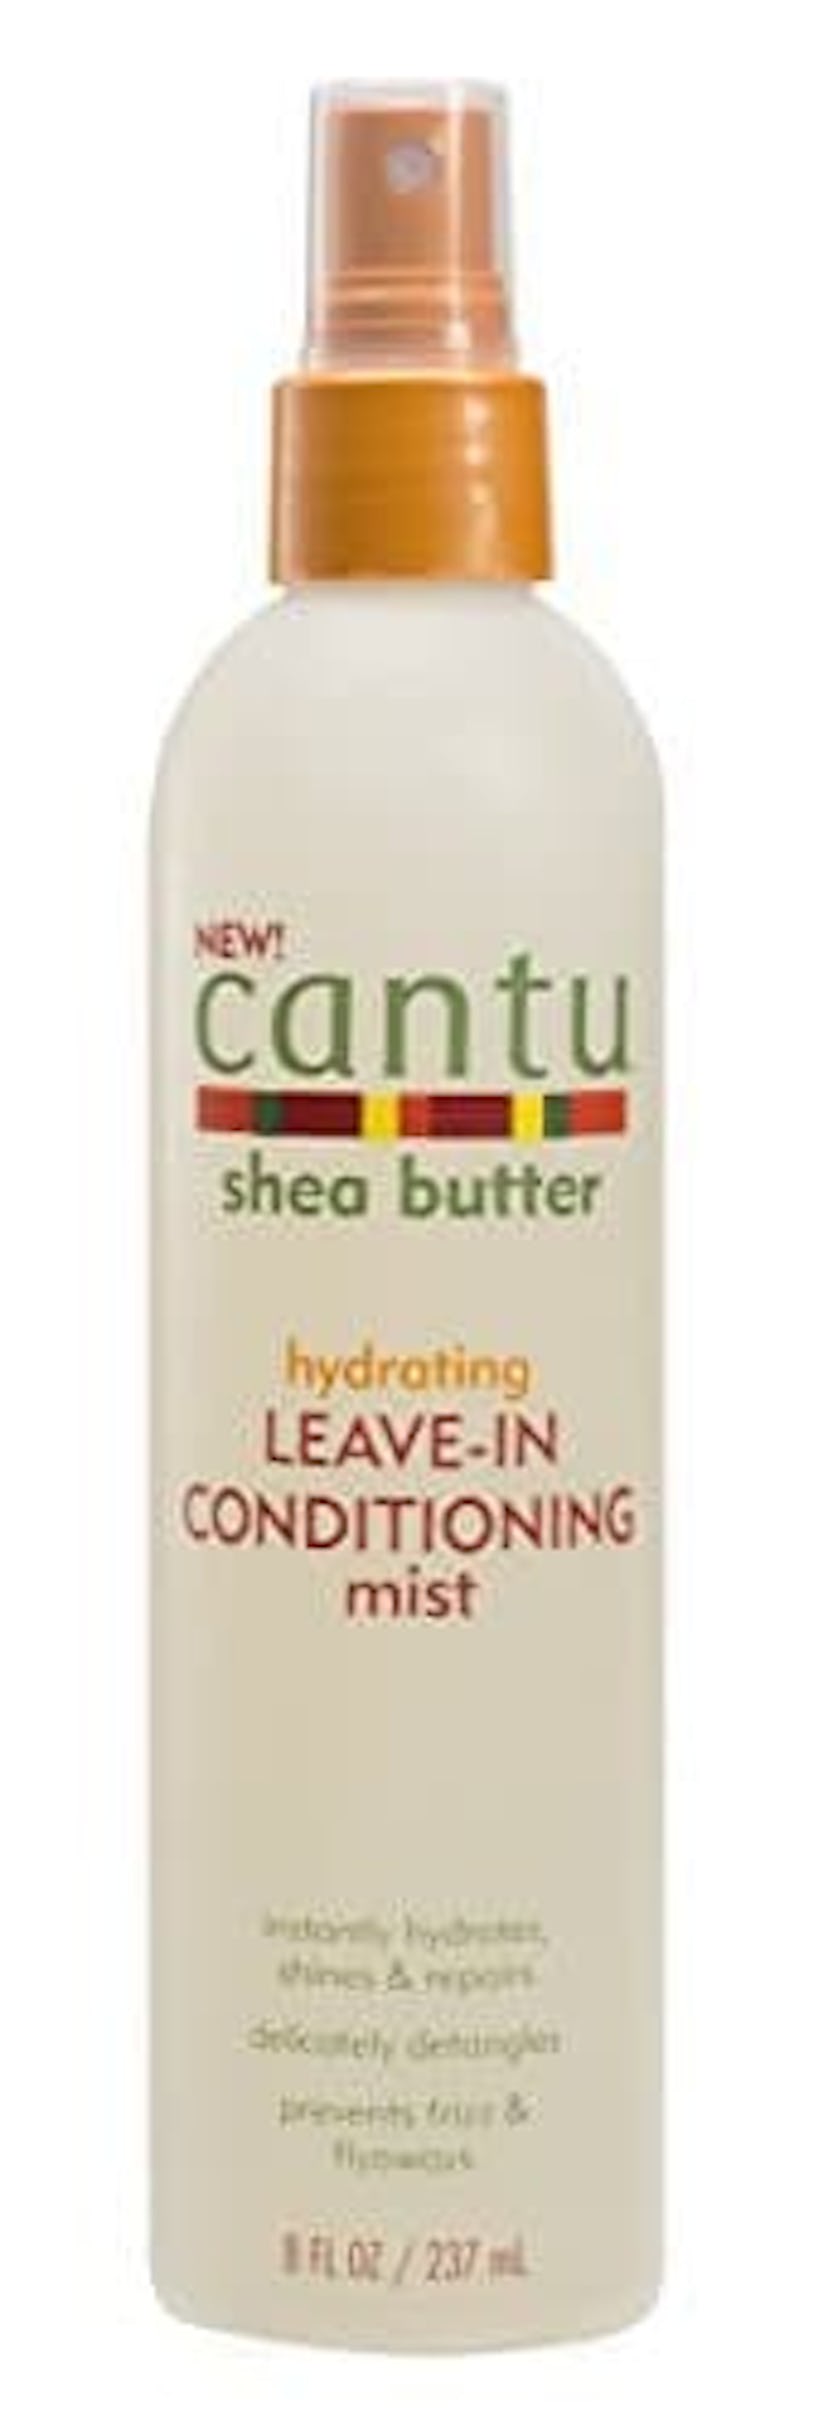 Cantu Shea Butter Hydrating Leave in Conditioning Mist